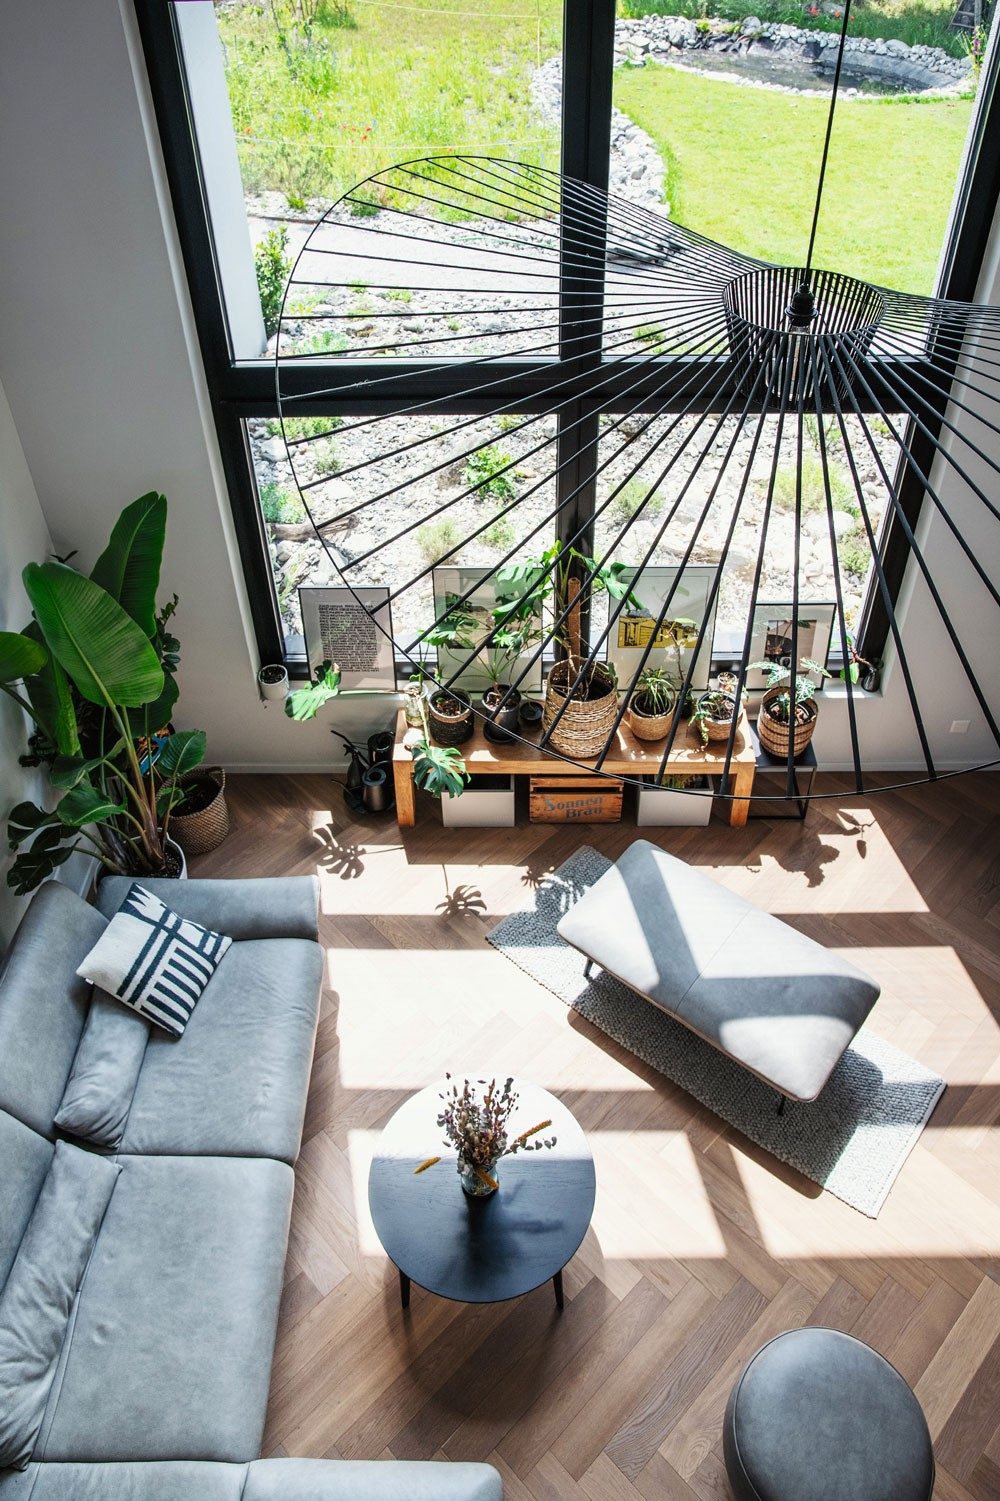 A living room with a grey sofa, wooden floor and many plants by a window.